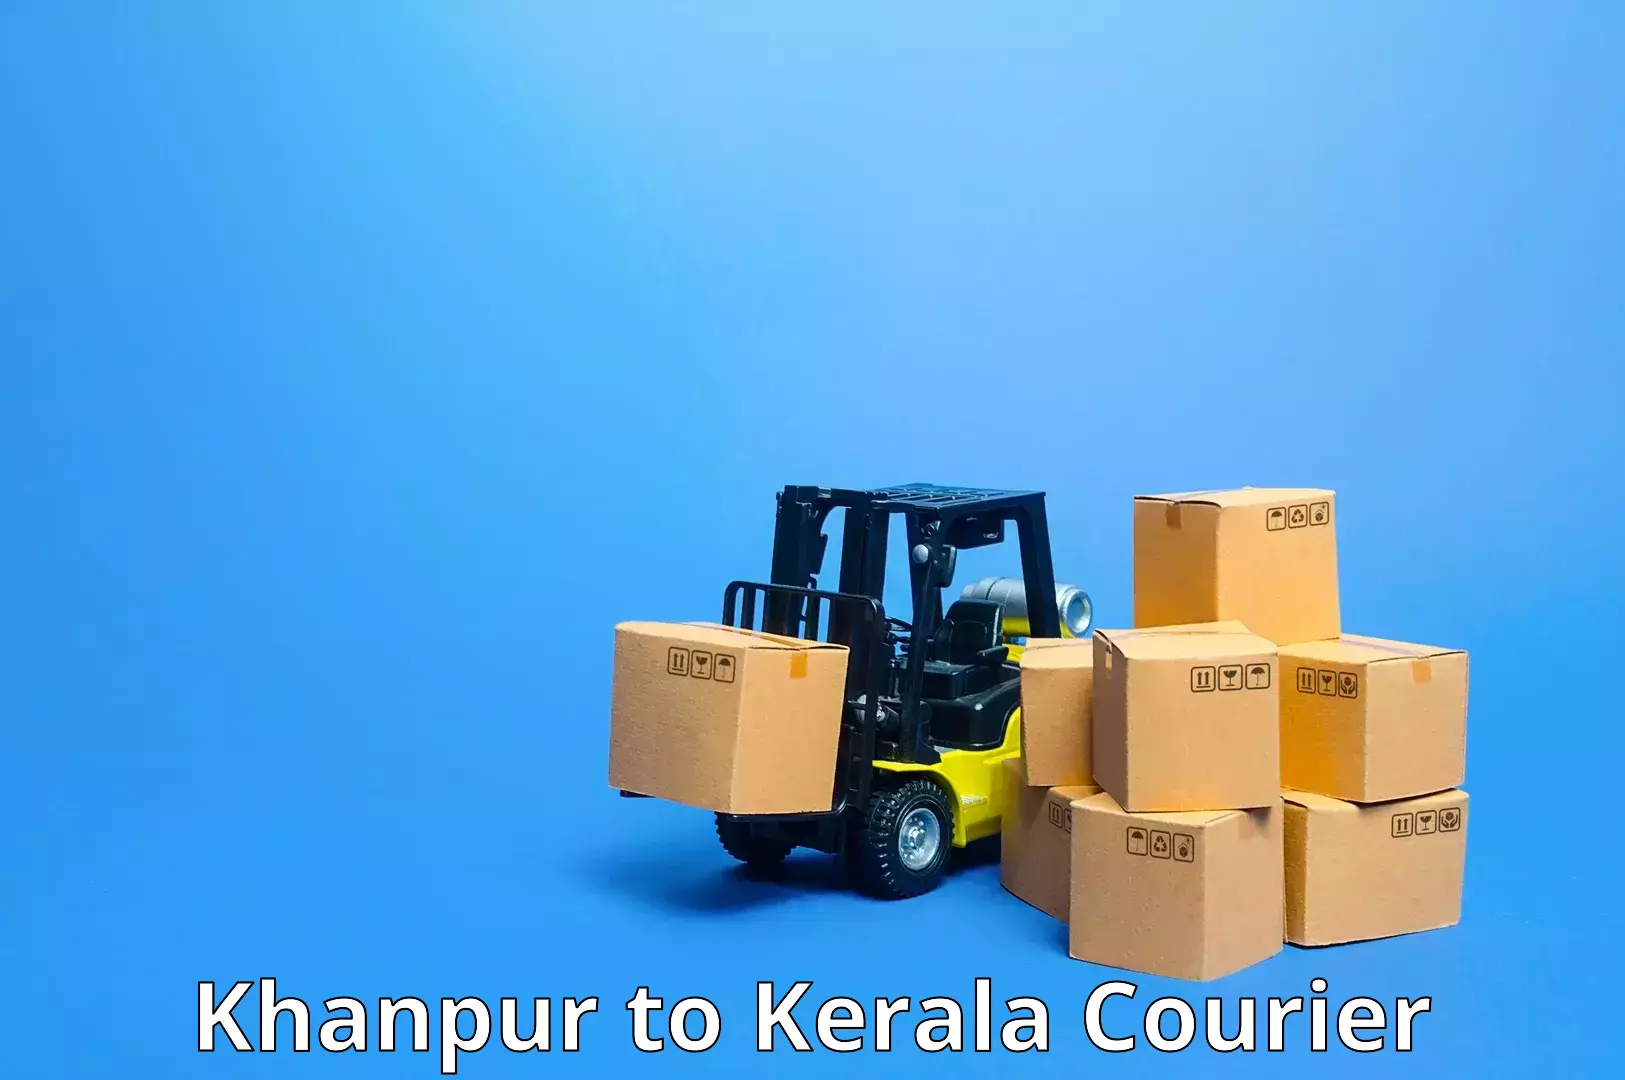 Quality courier services Khanpur to Changanacherry